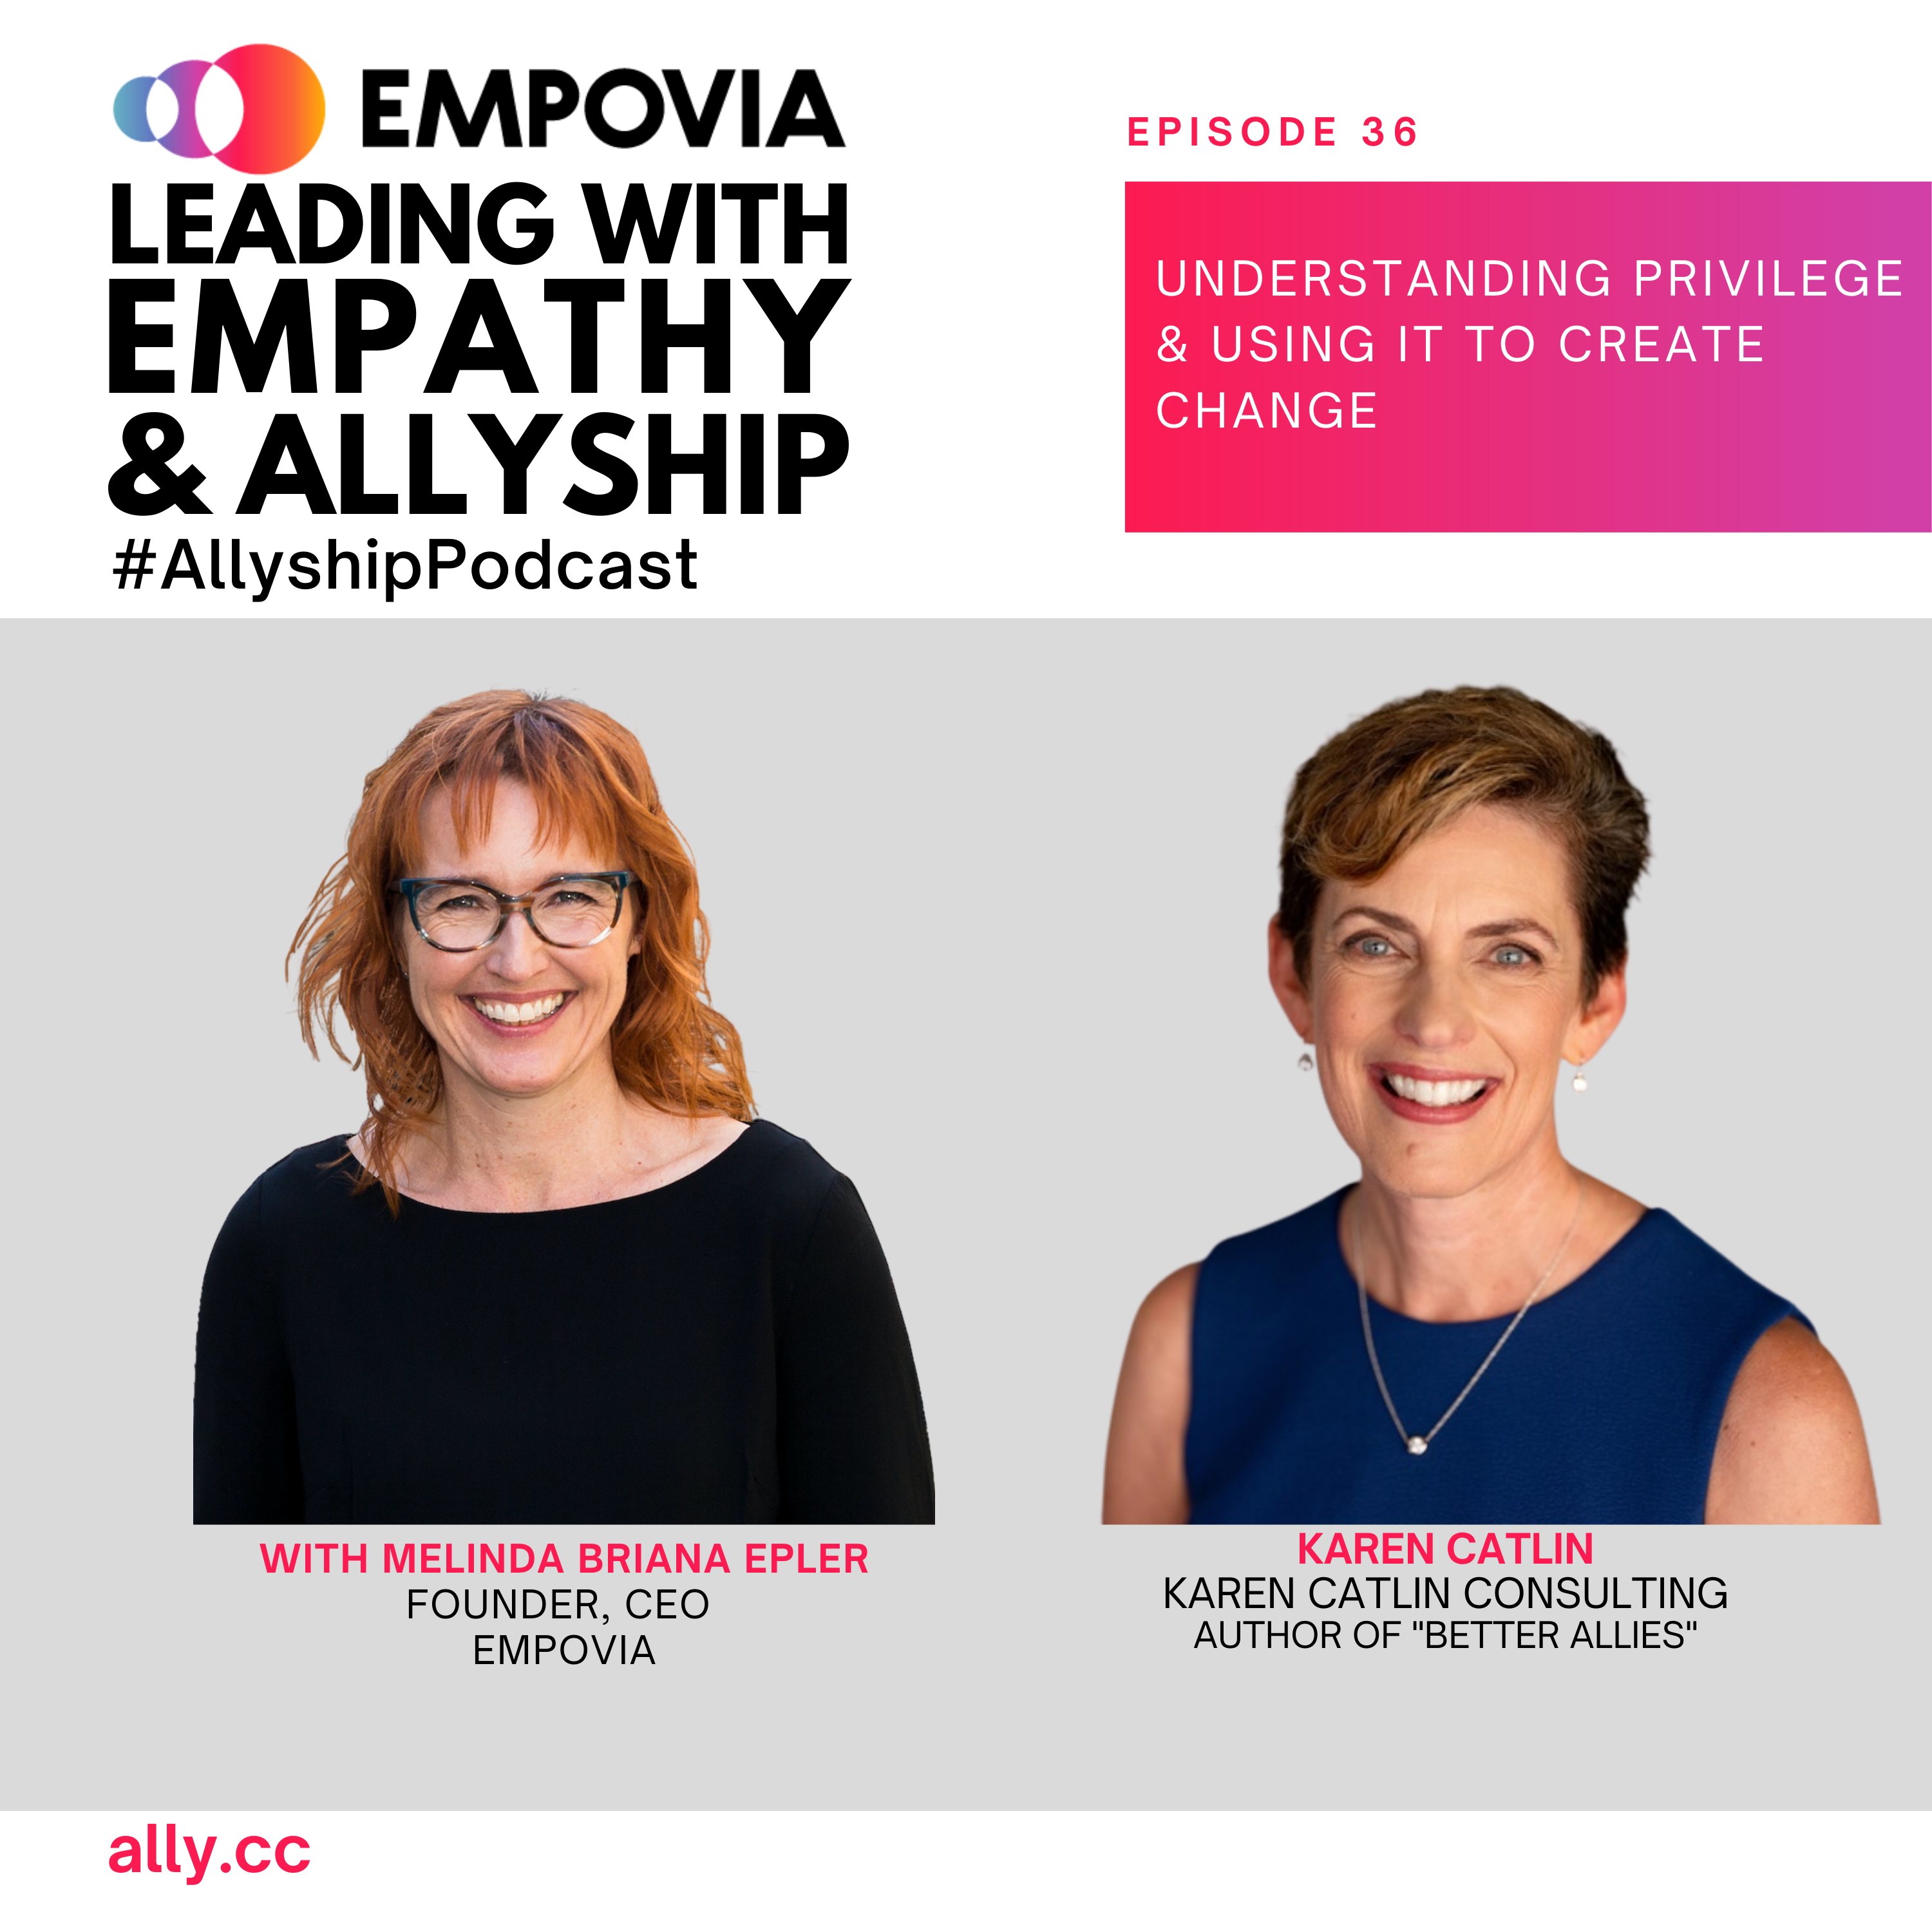 Leading With Empathy & Allyship promo with the Empovia logo and photos of host Melinda Briana Epler, a White woman with red hair and glasses, and Karen Catlin, a White woman with short hair and blue top.